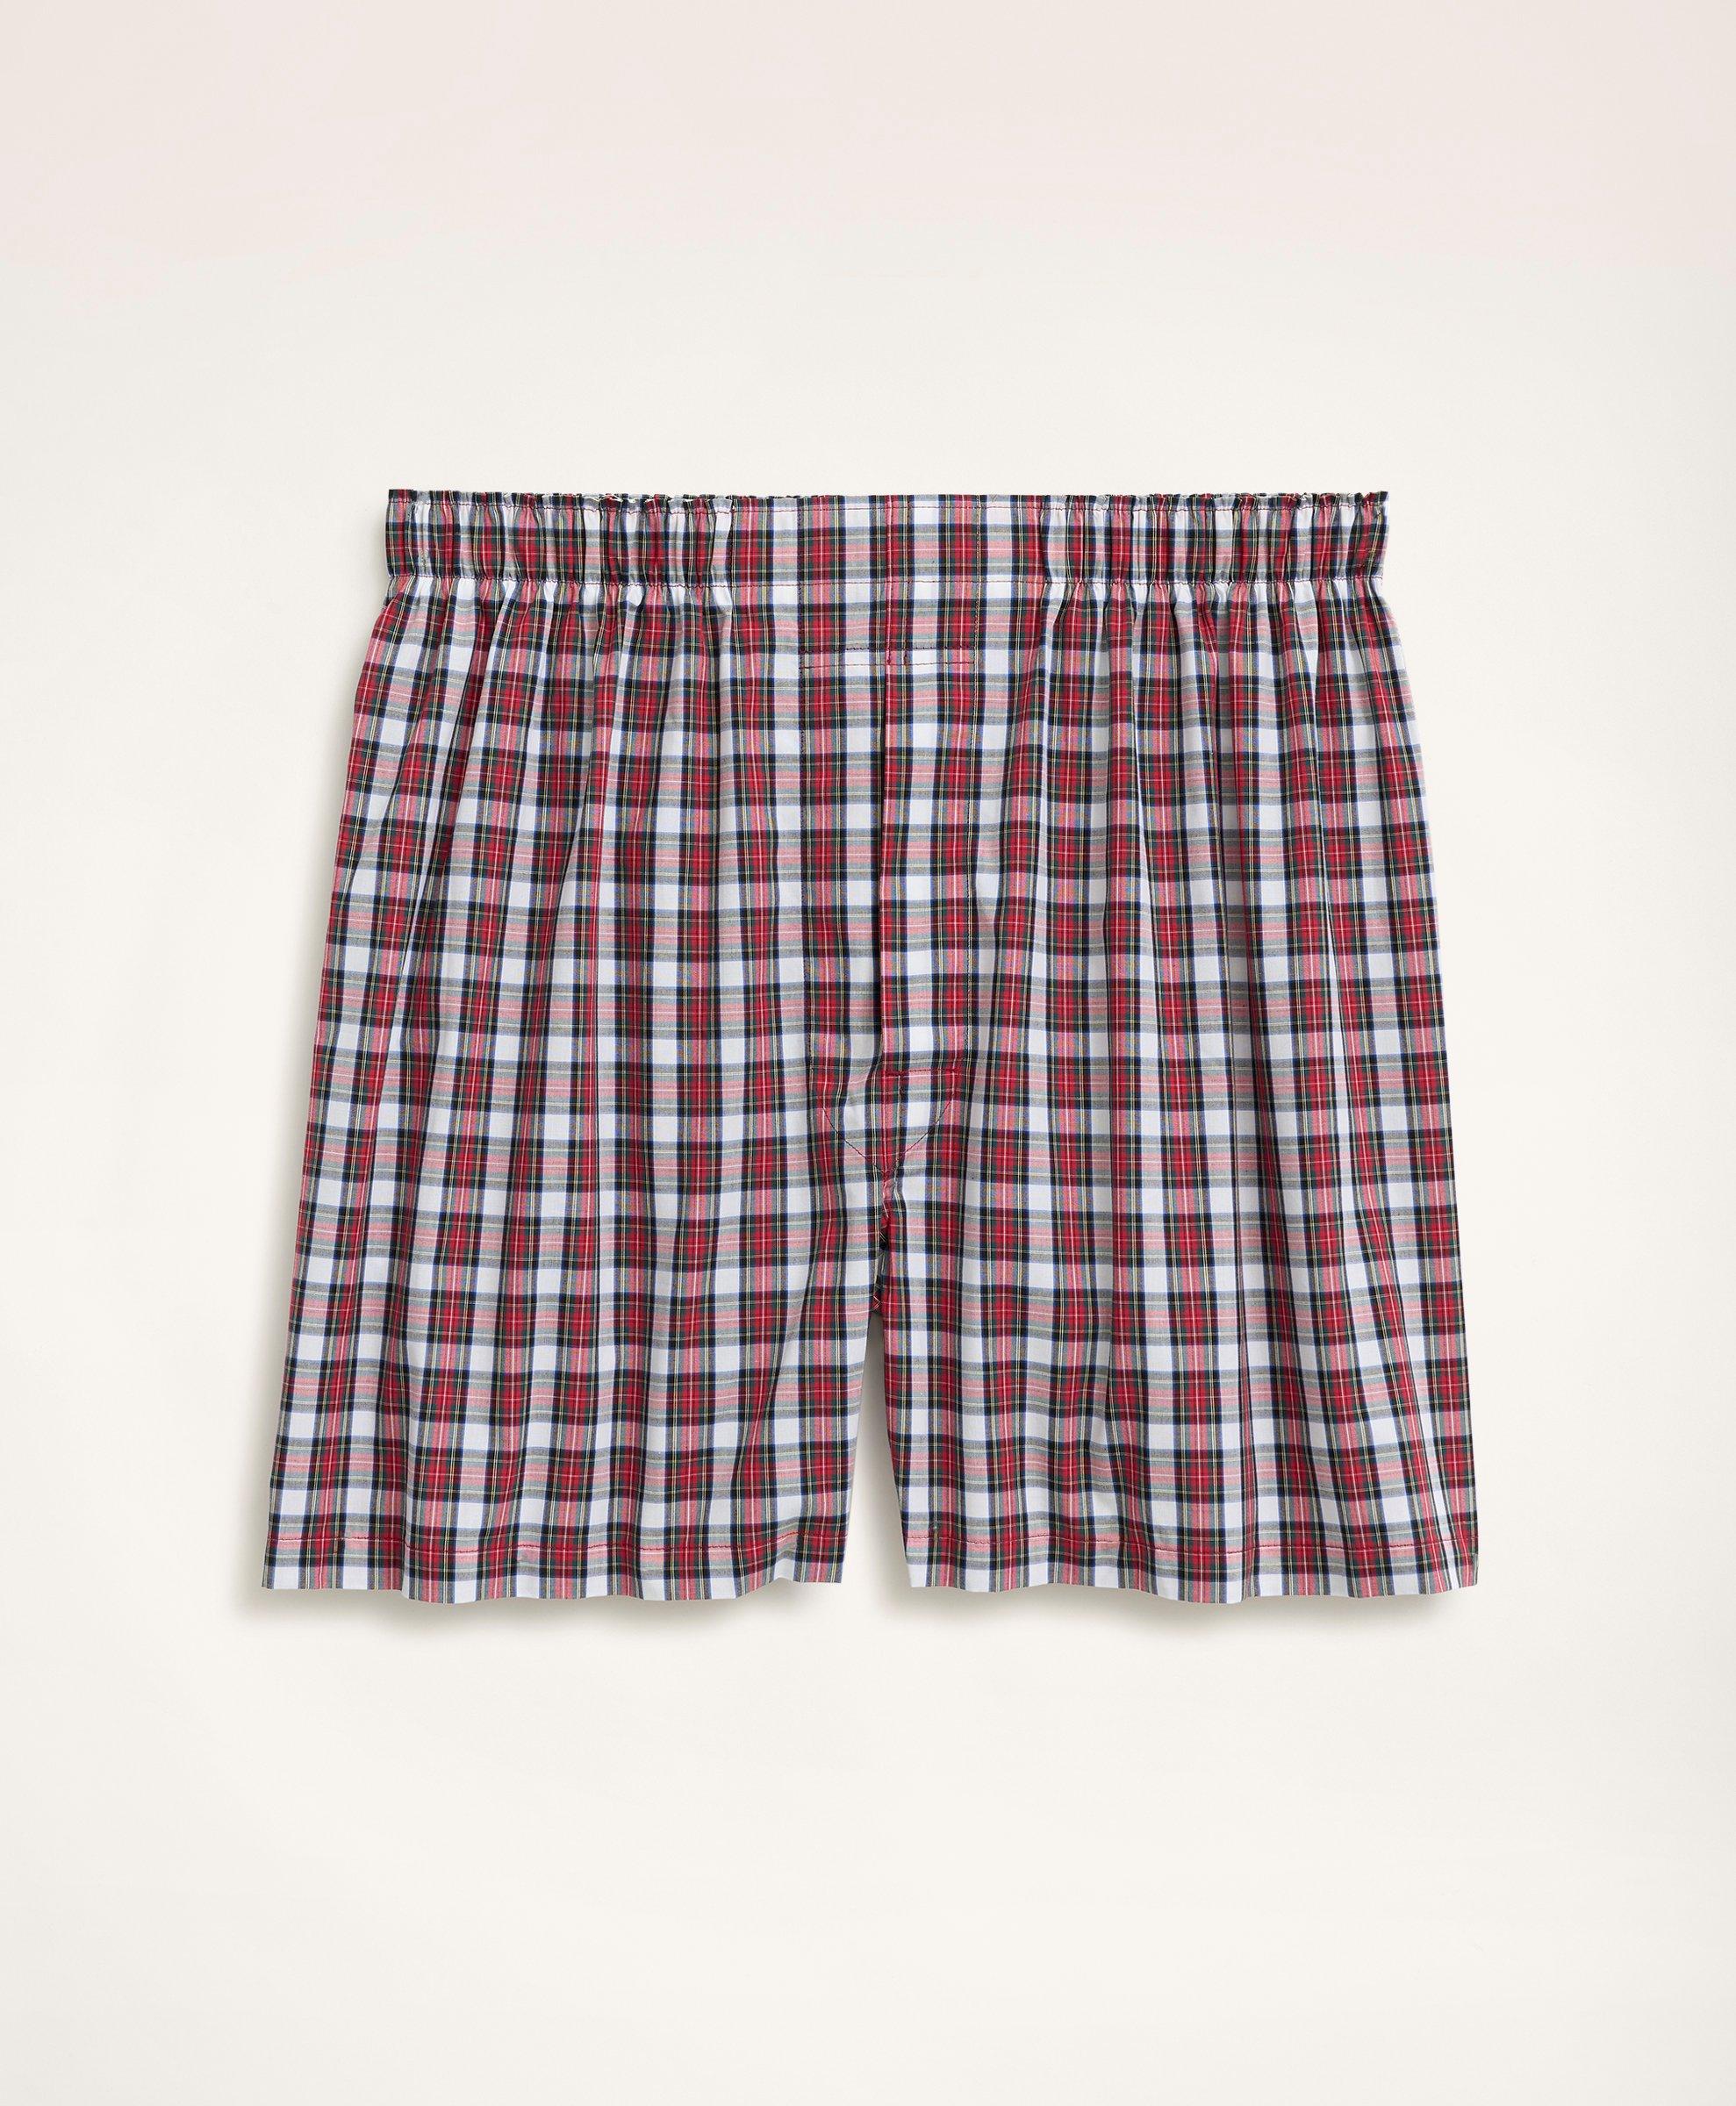 Breathable Cotton Plaid Boxer Plaid Shorts For Men Flexible, Big, And Sexy Underwear  From Merrylady, $17.86